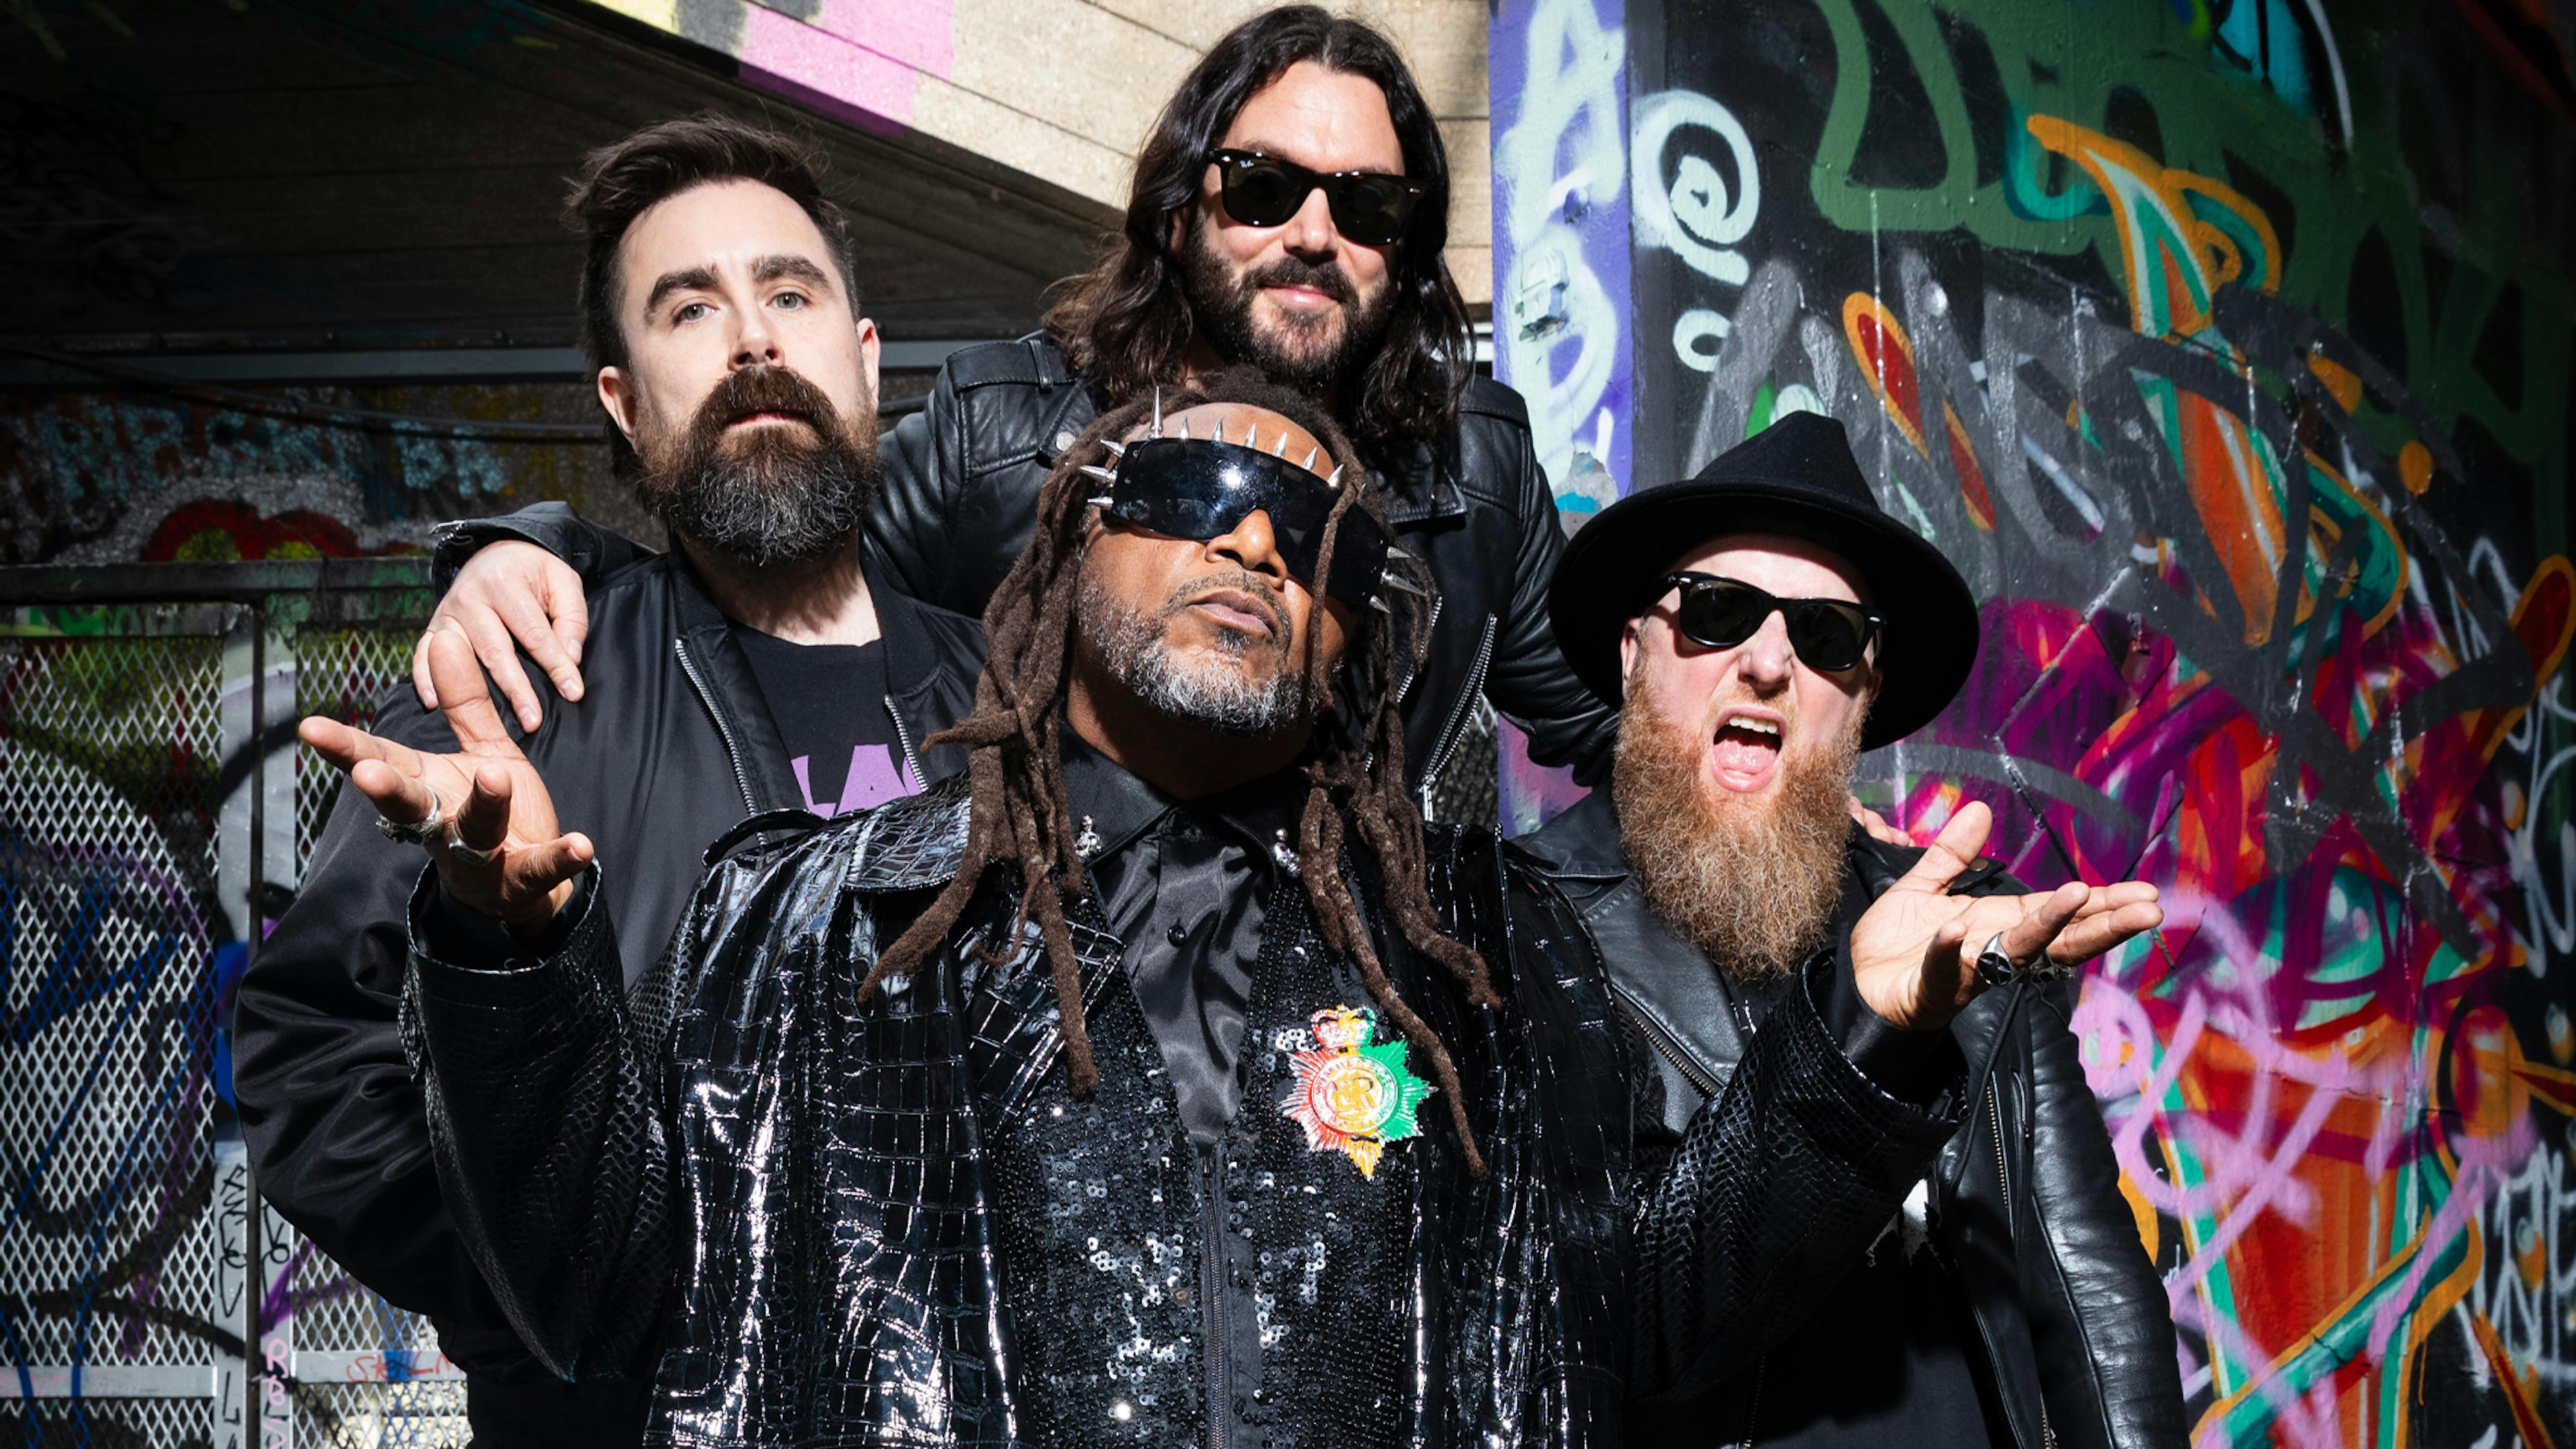 Skindred are at Number One in the UK midweek Official Albums Chart